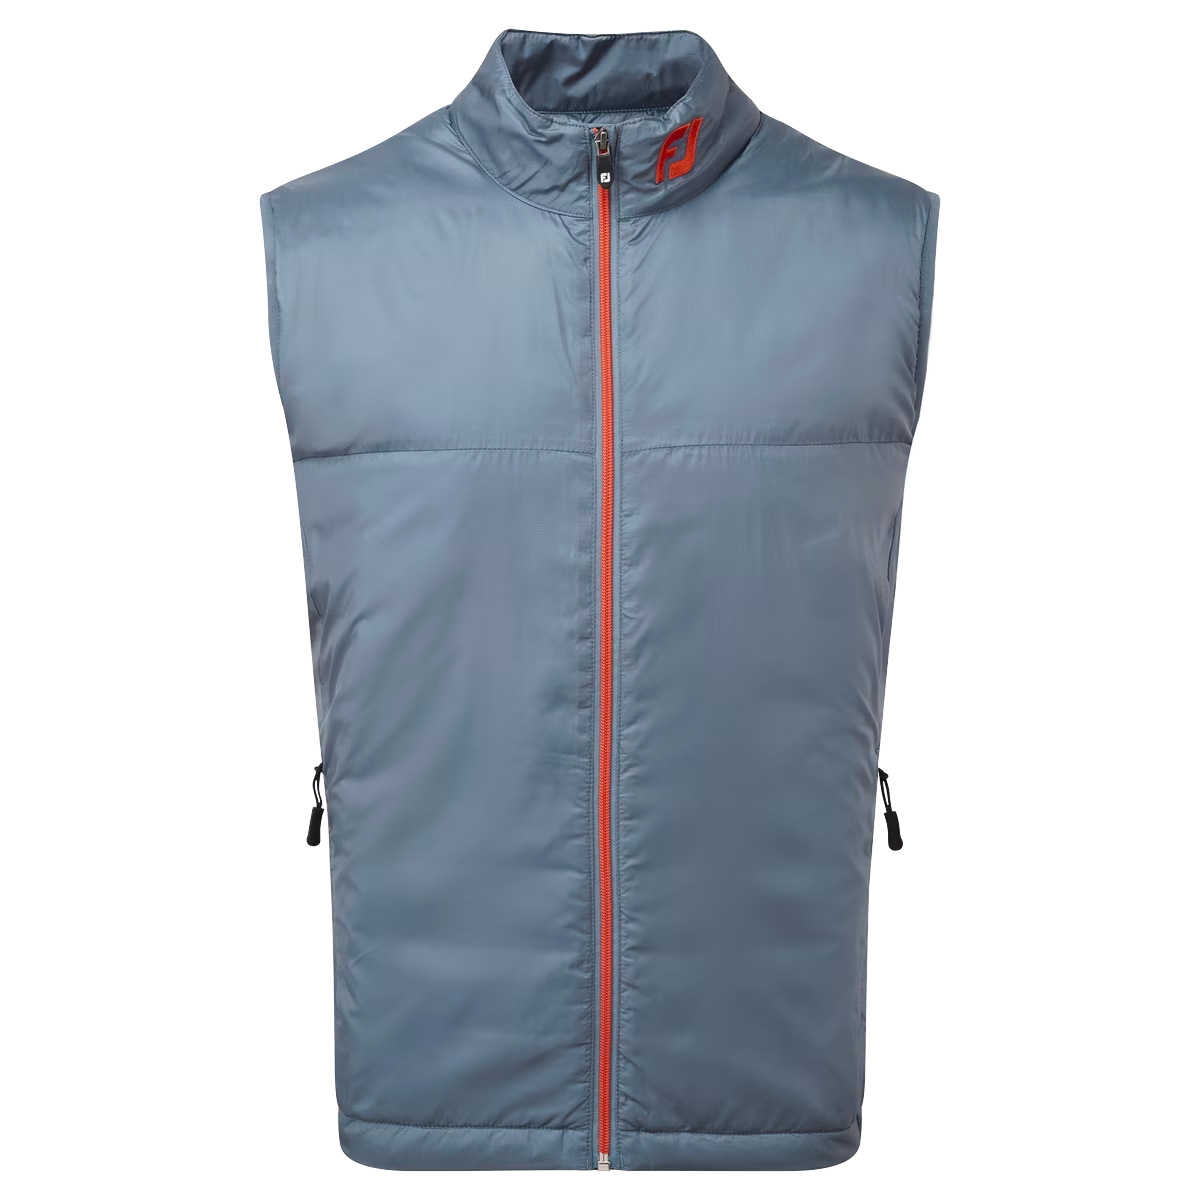 FootJoy Lightweight Thermal Insulated Vest Gilet  - Graphite